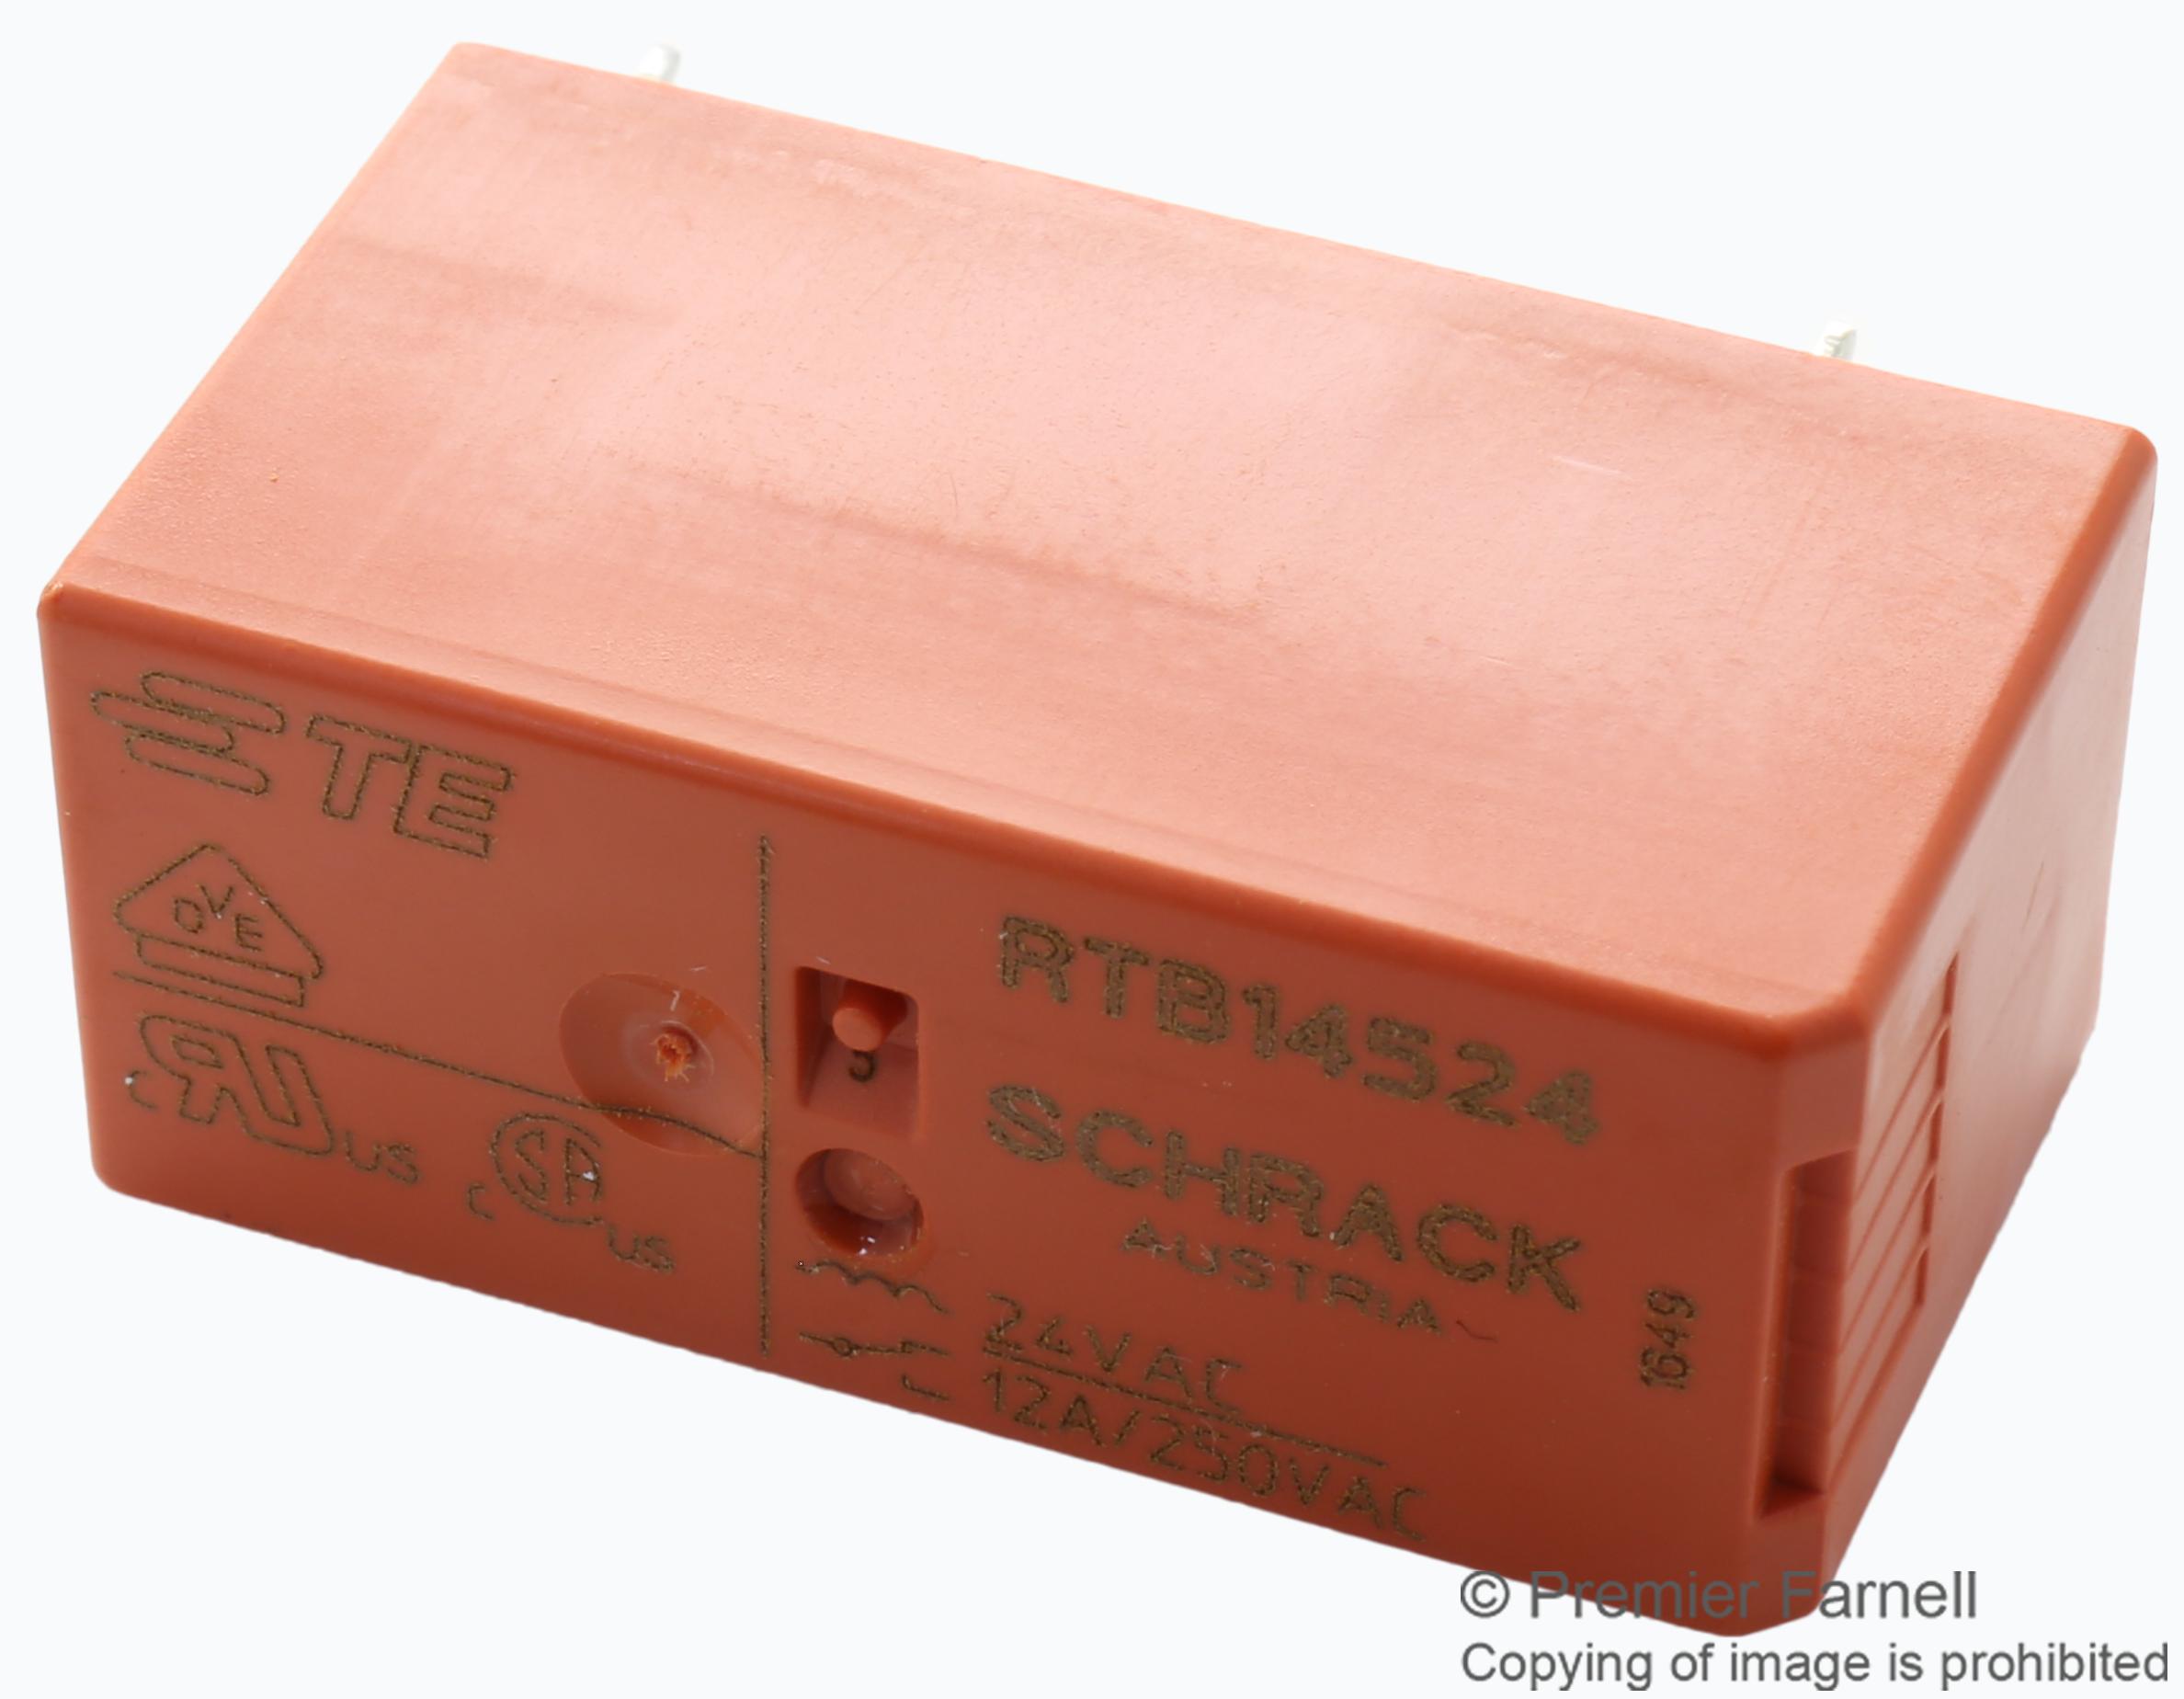 RTB14524 POWER RELAY, SPDT, 12A, 250V, TH SCHRACK - TE CONNECTIVITY